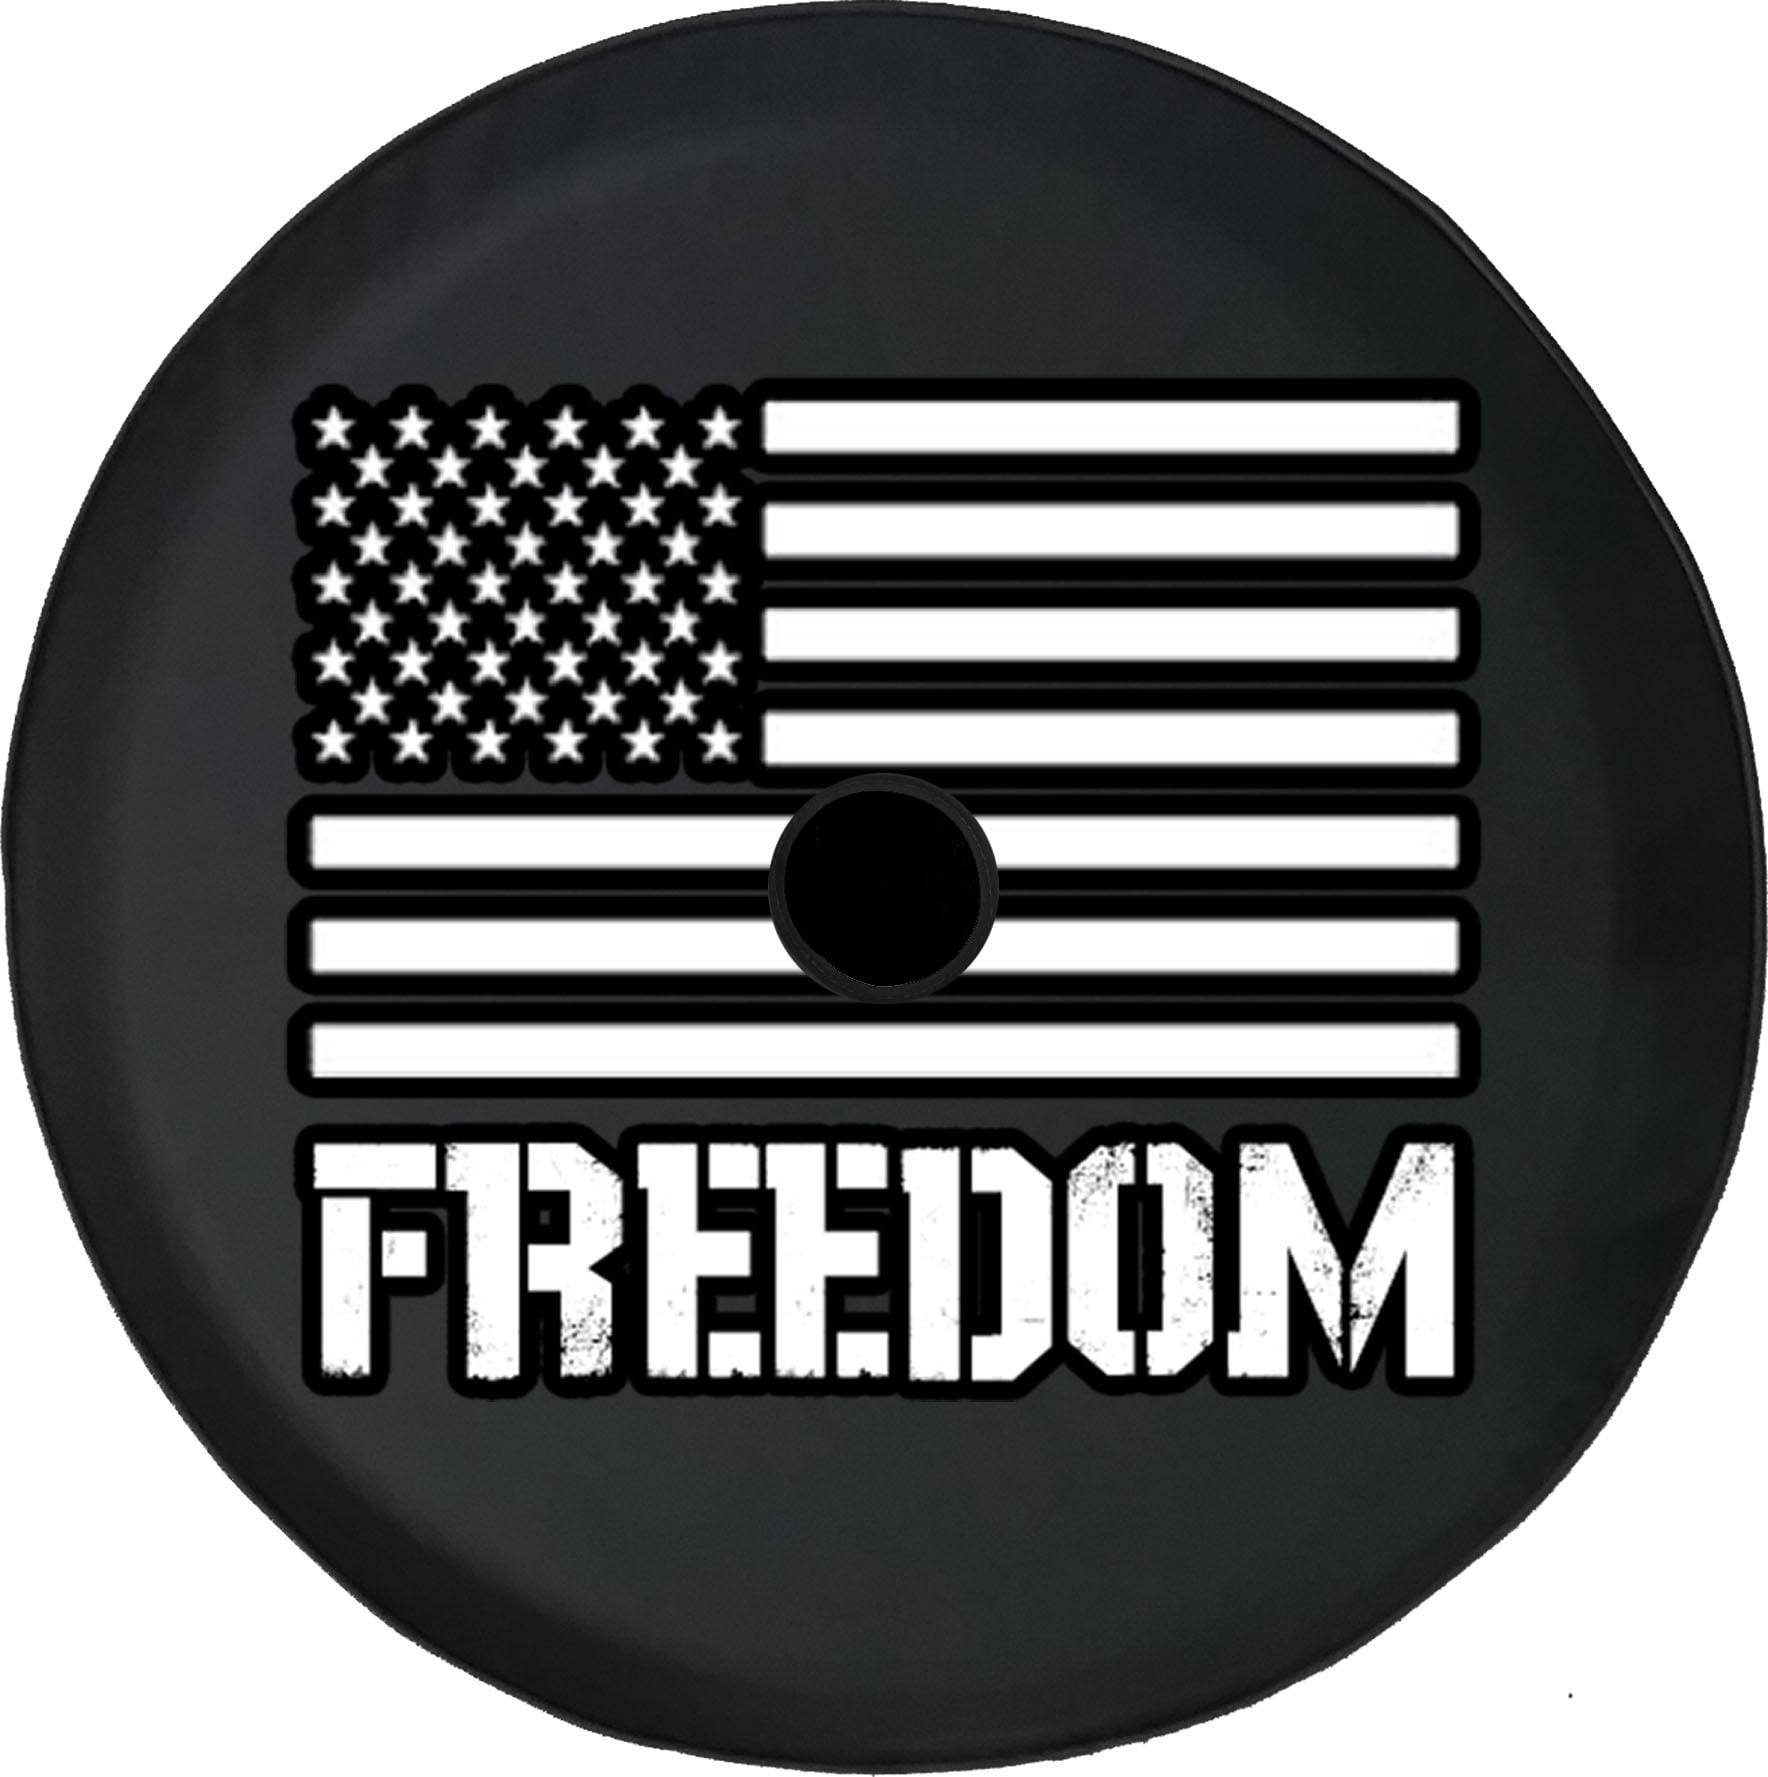 Black Tire Covers Tire Accessories for Campers, SUVs, Trailers, Trucks,  RVs and More Freedom Military American Flag Black 33 Inch